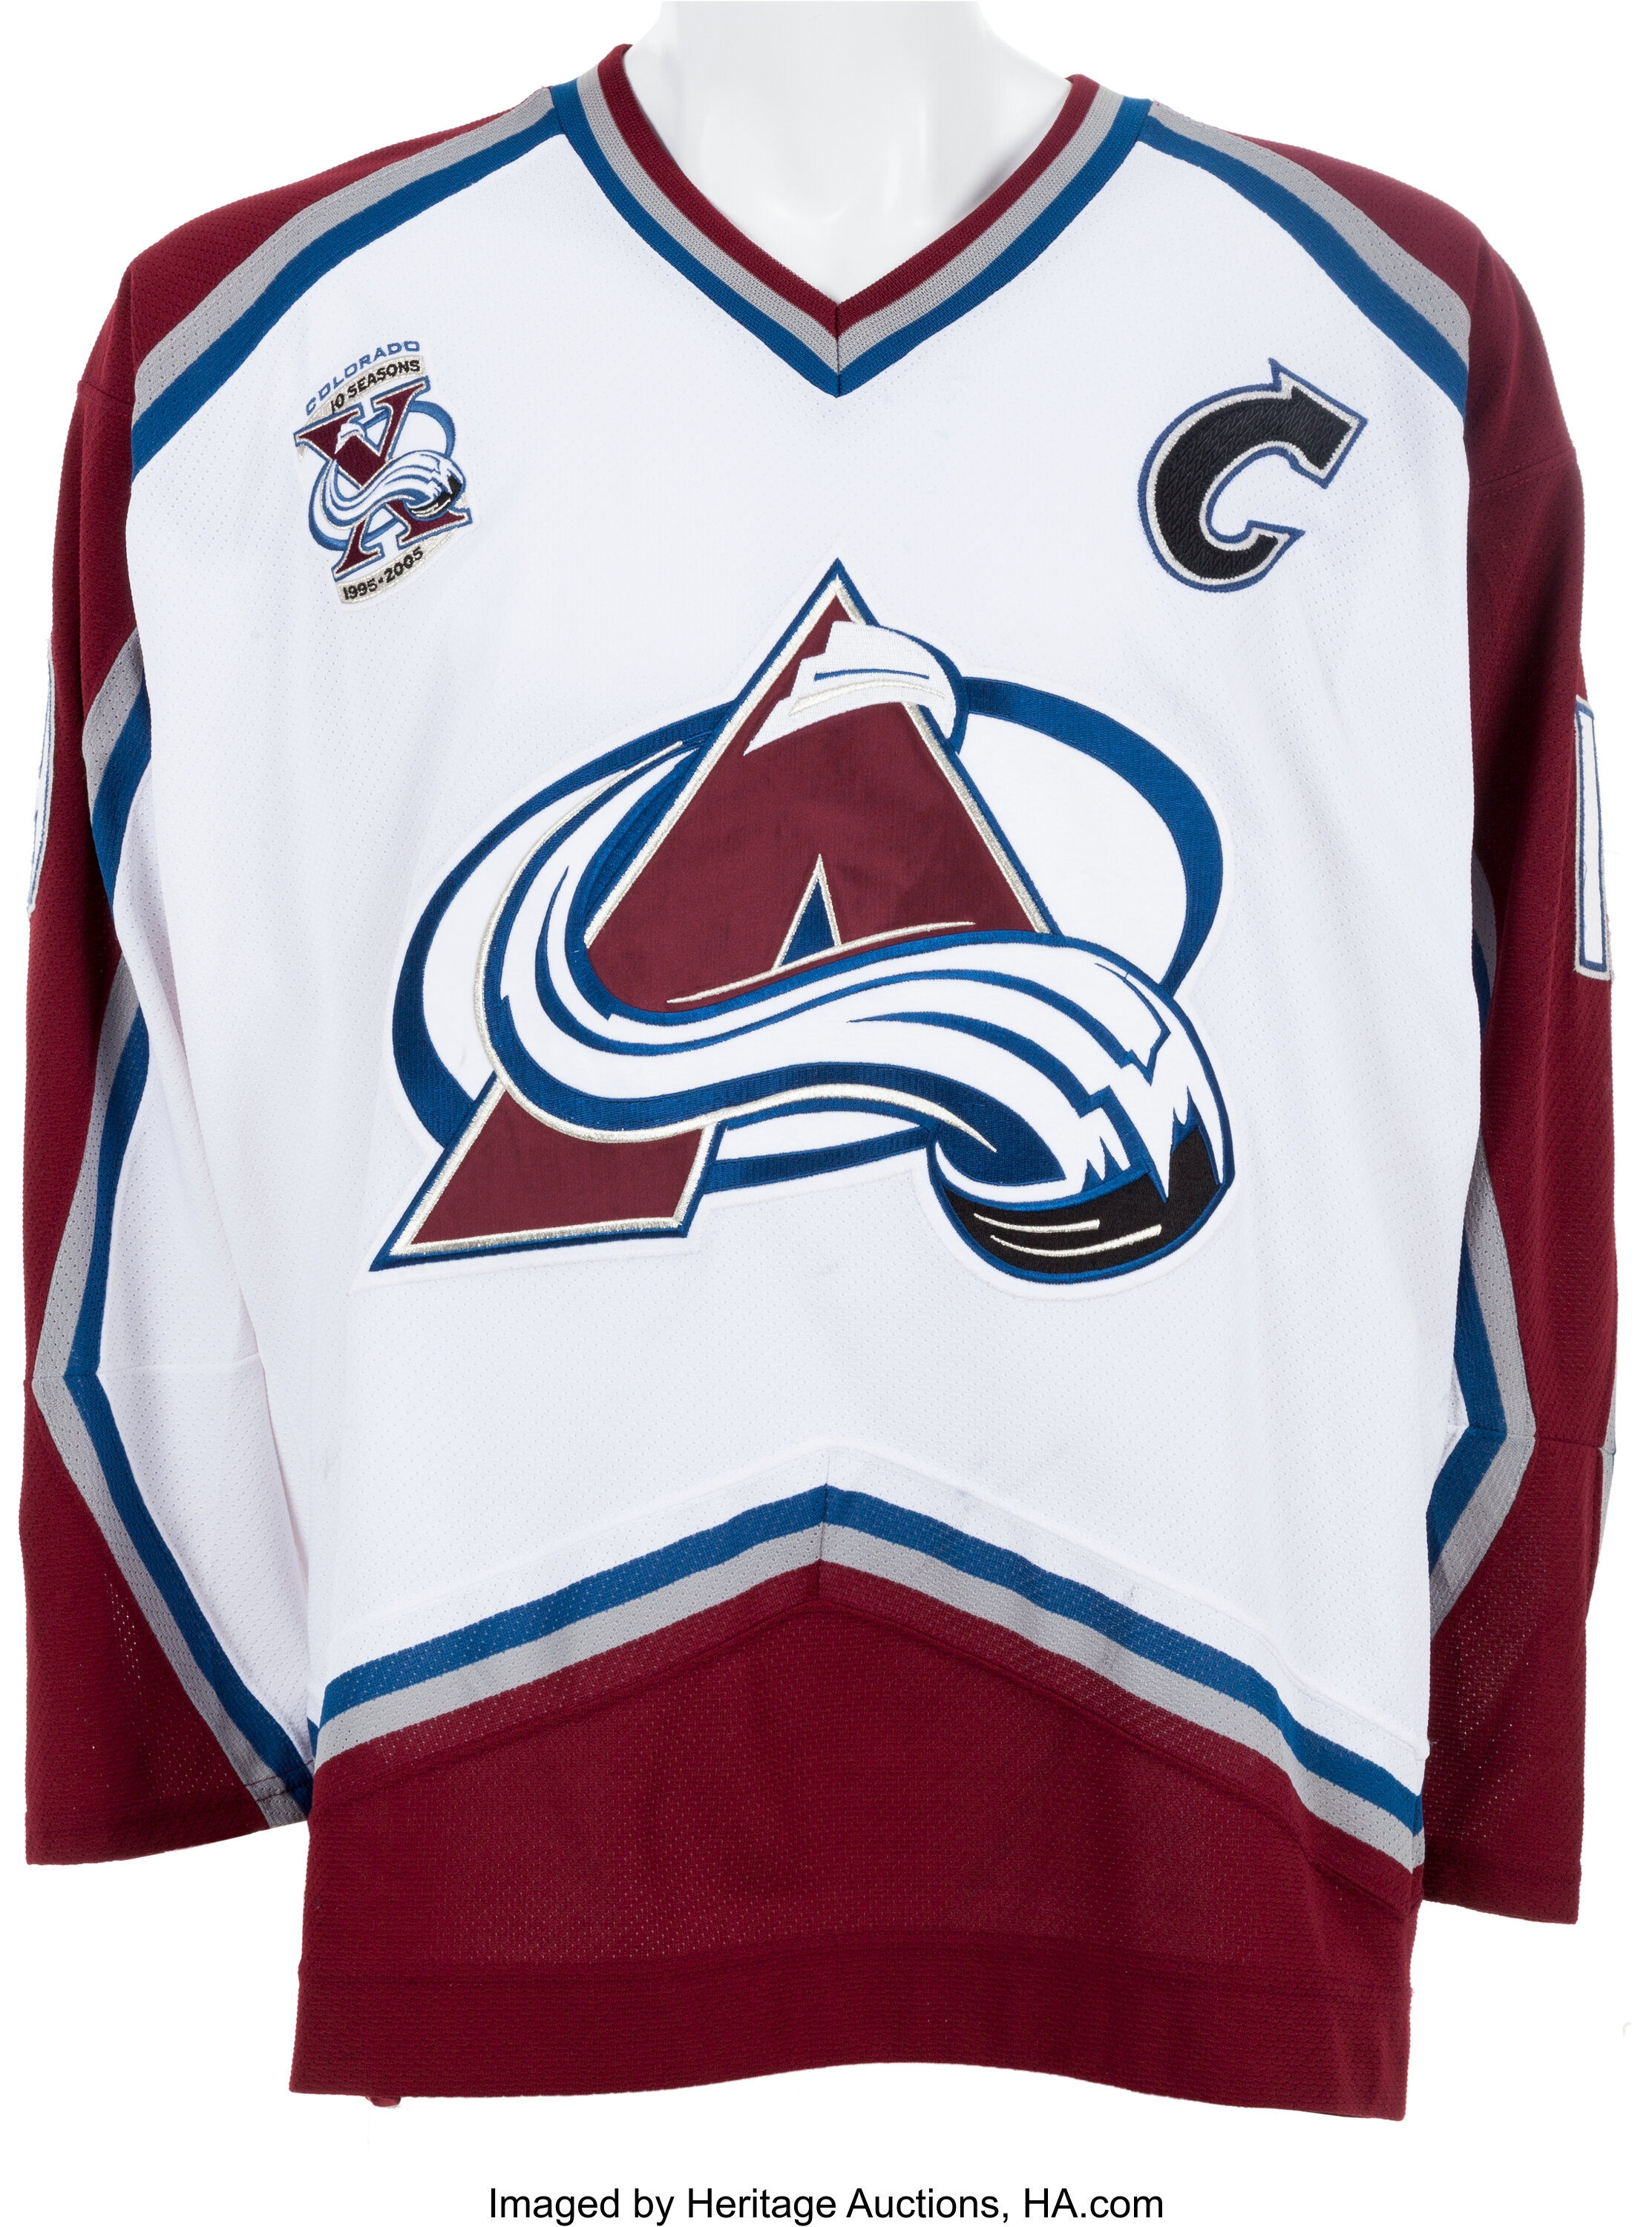 We've got game-issued jerseys - Colorado Avalanche